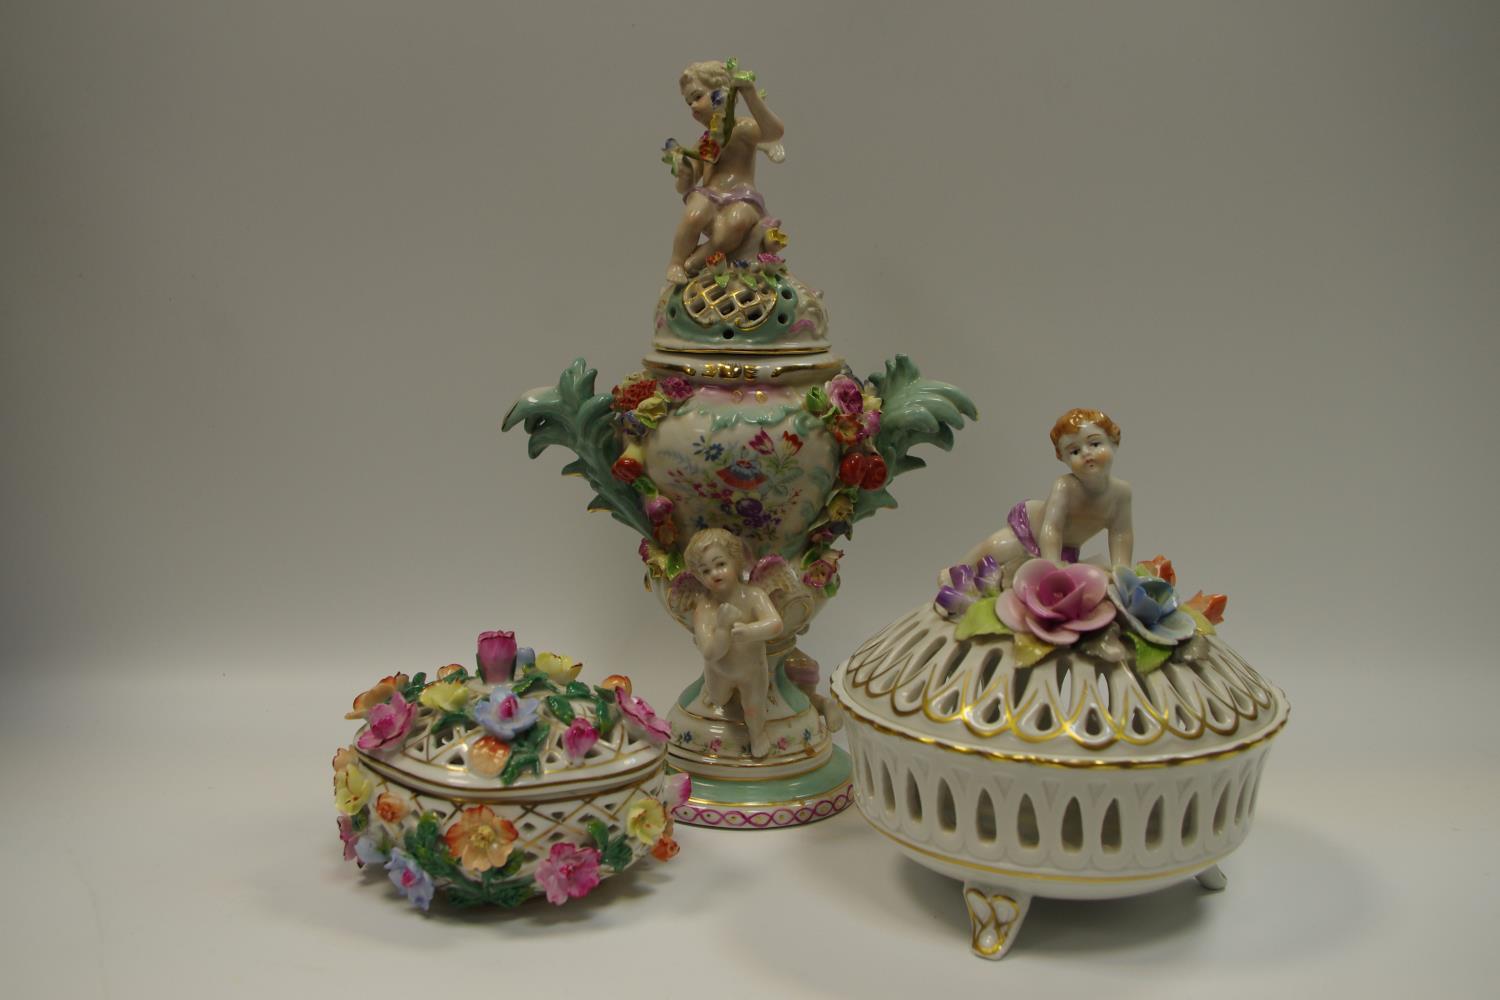 An Augustus Rex 19th century Dresden porcelain twin handled urn and cover decorated with putti and